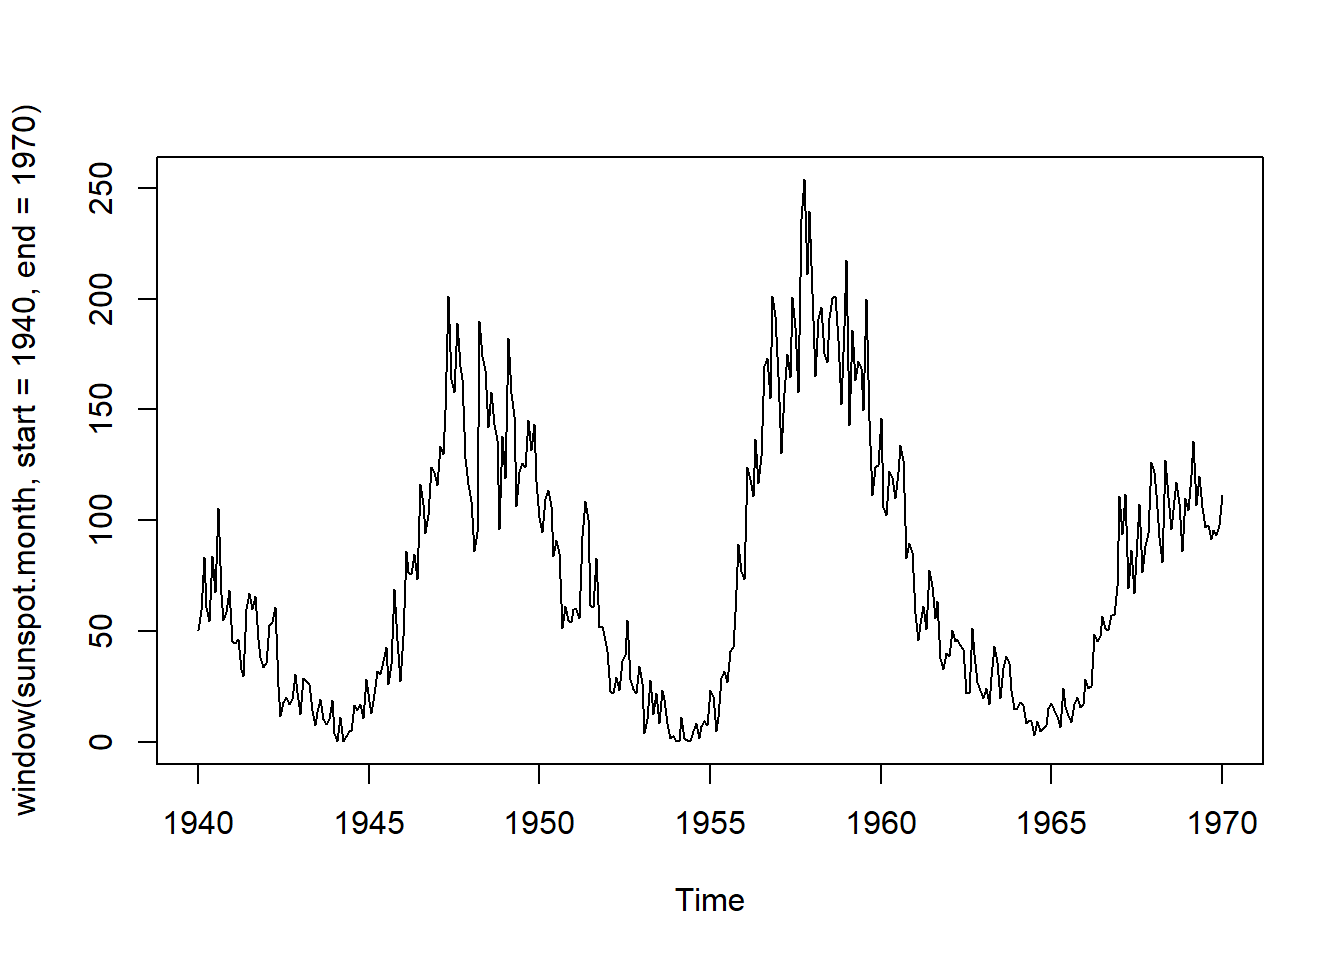 Monthly sunspot activity from 1940 to 1970